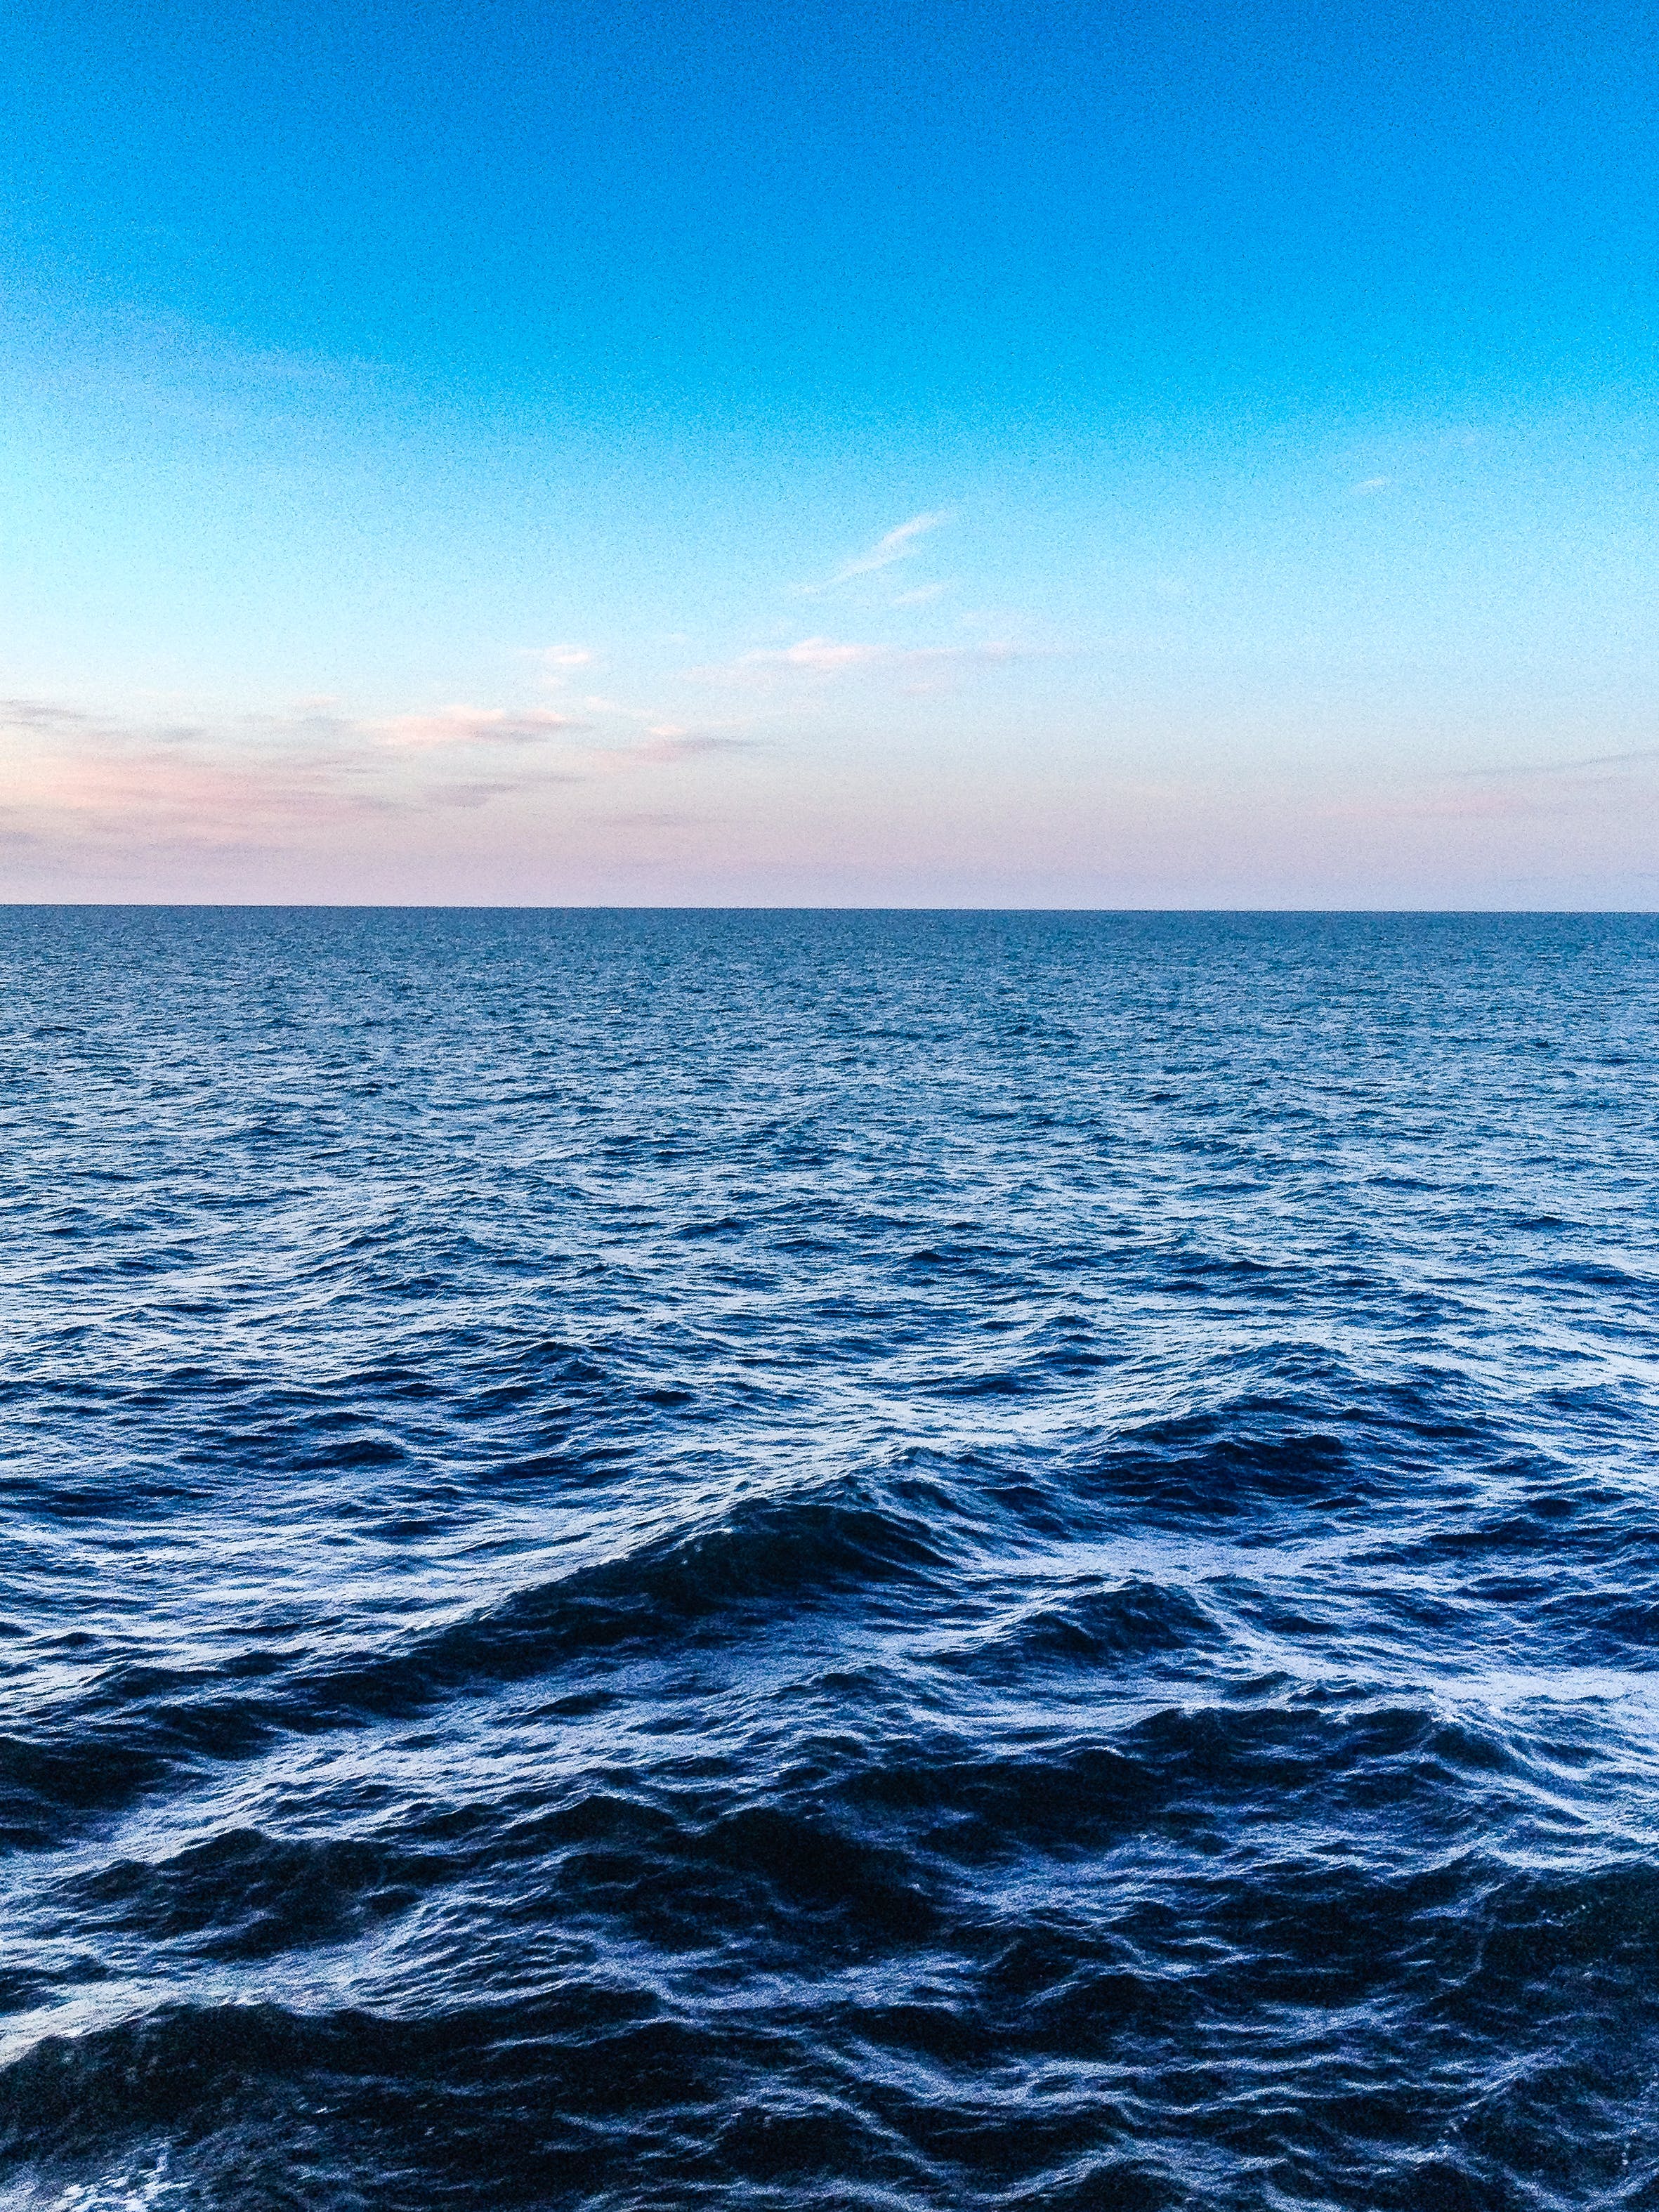 Waves and the horizon on the open sea